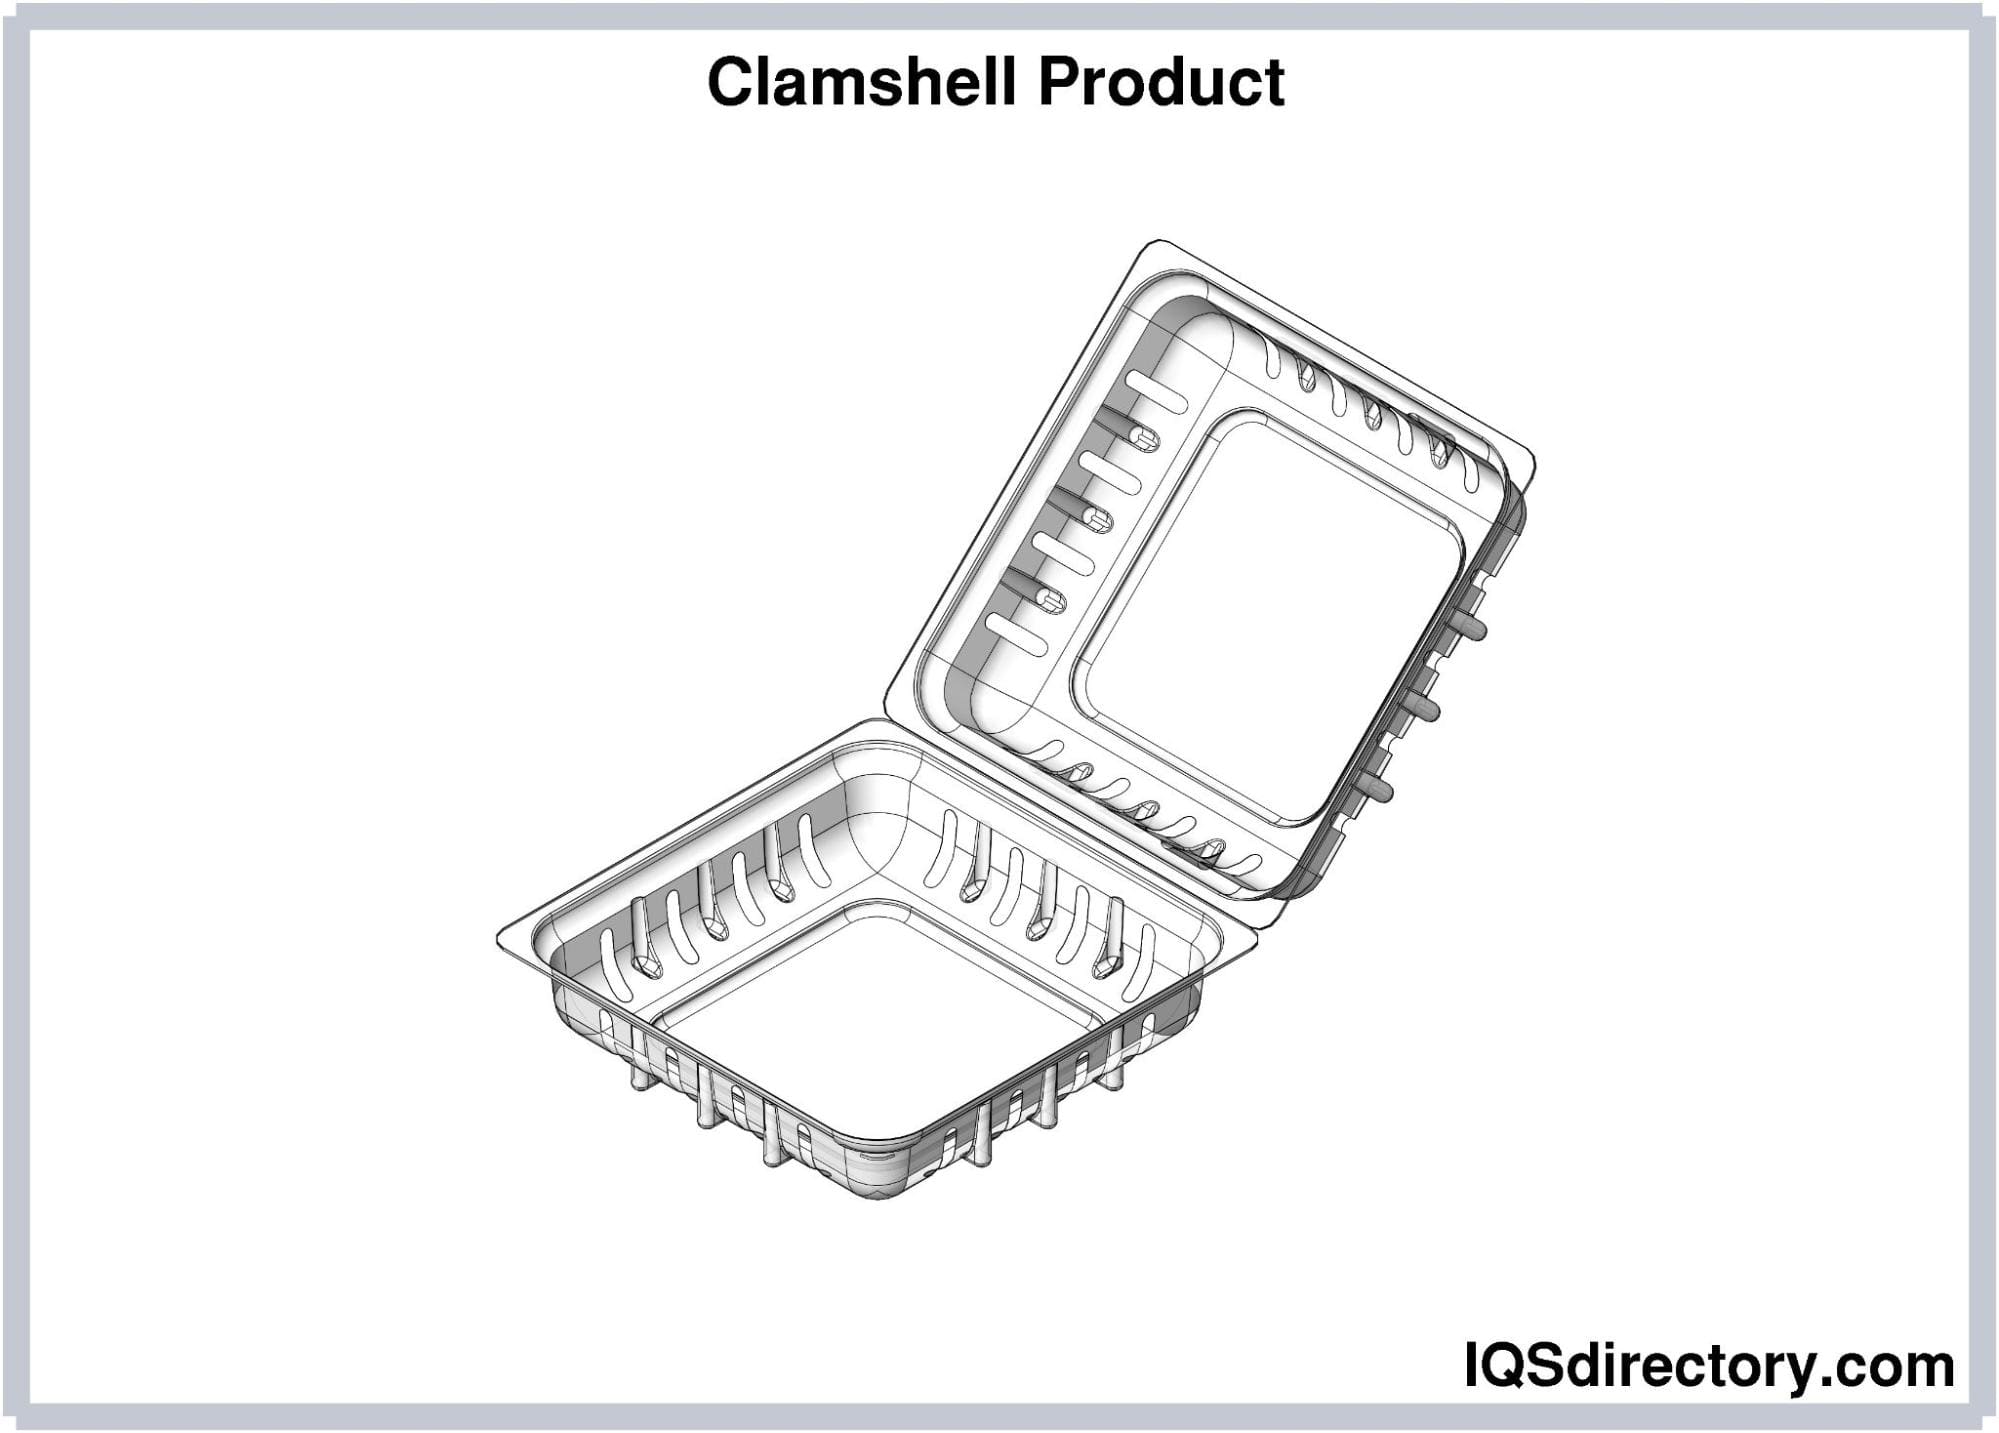 Clamshell Product